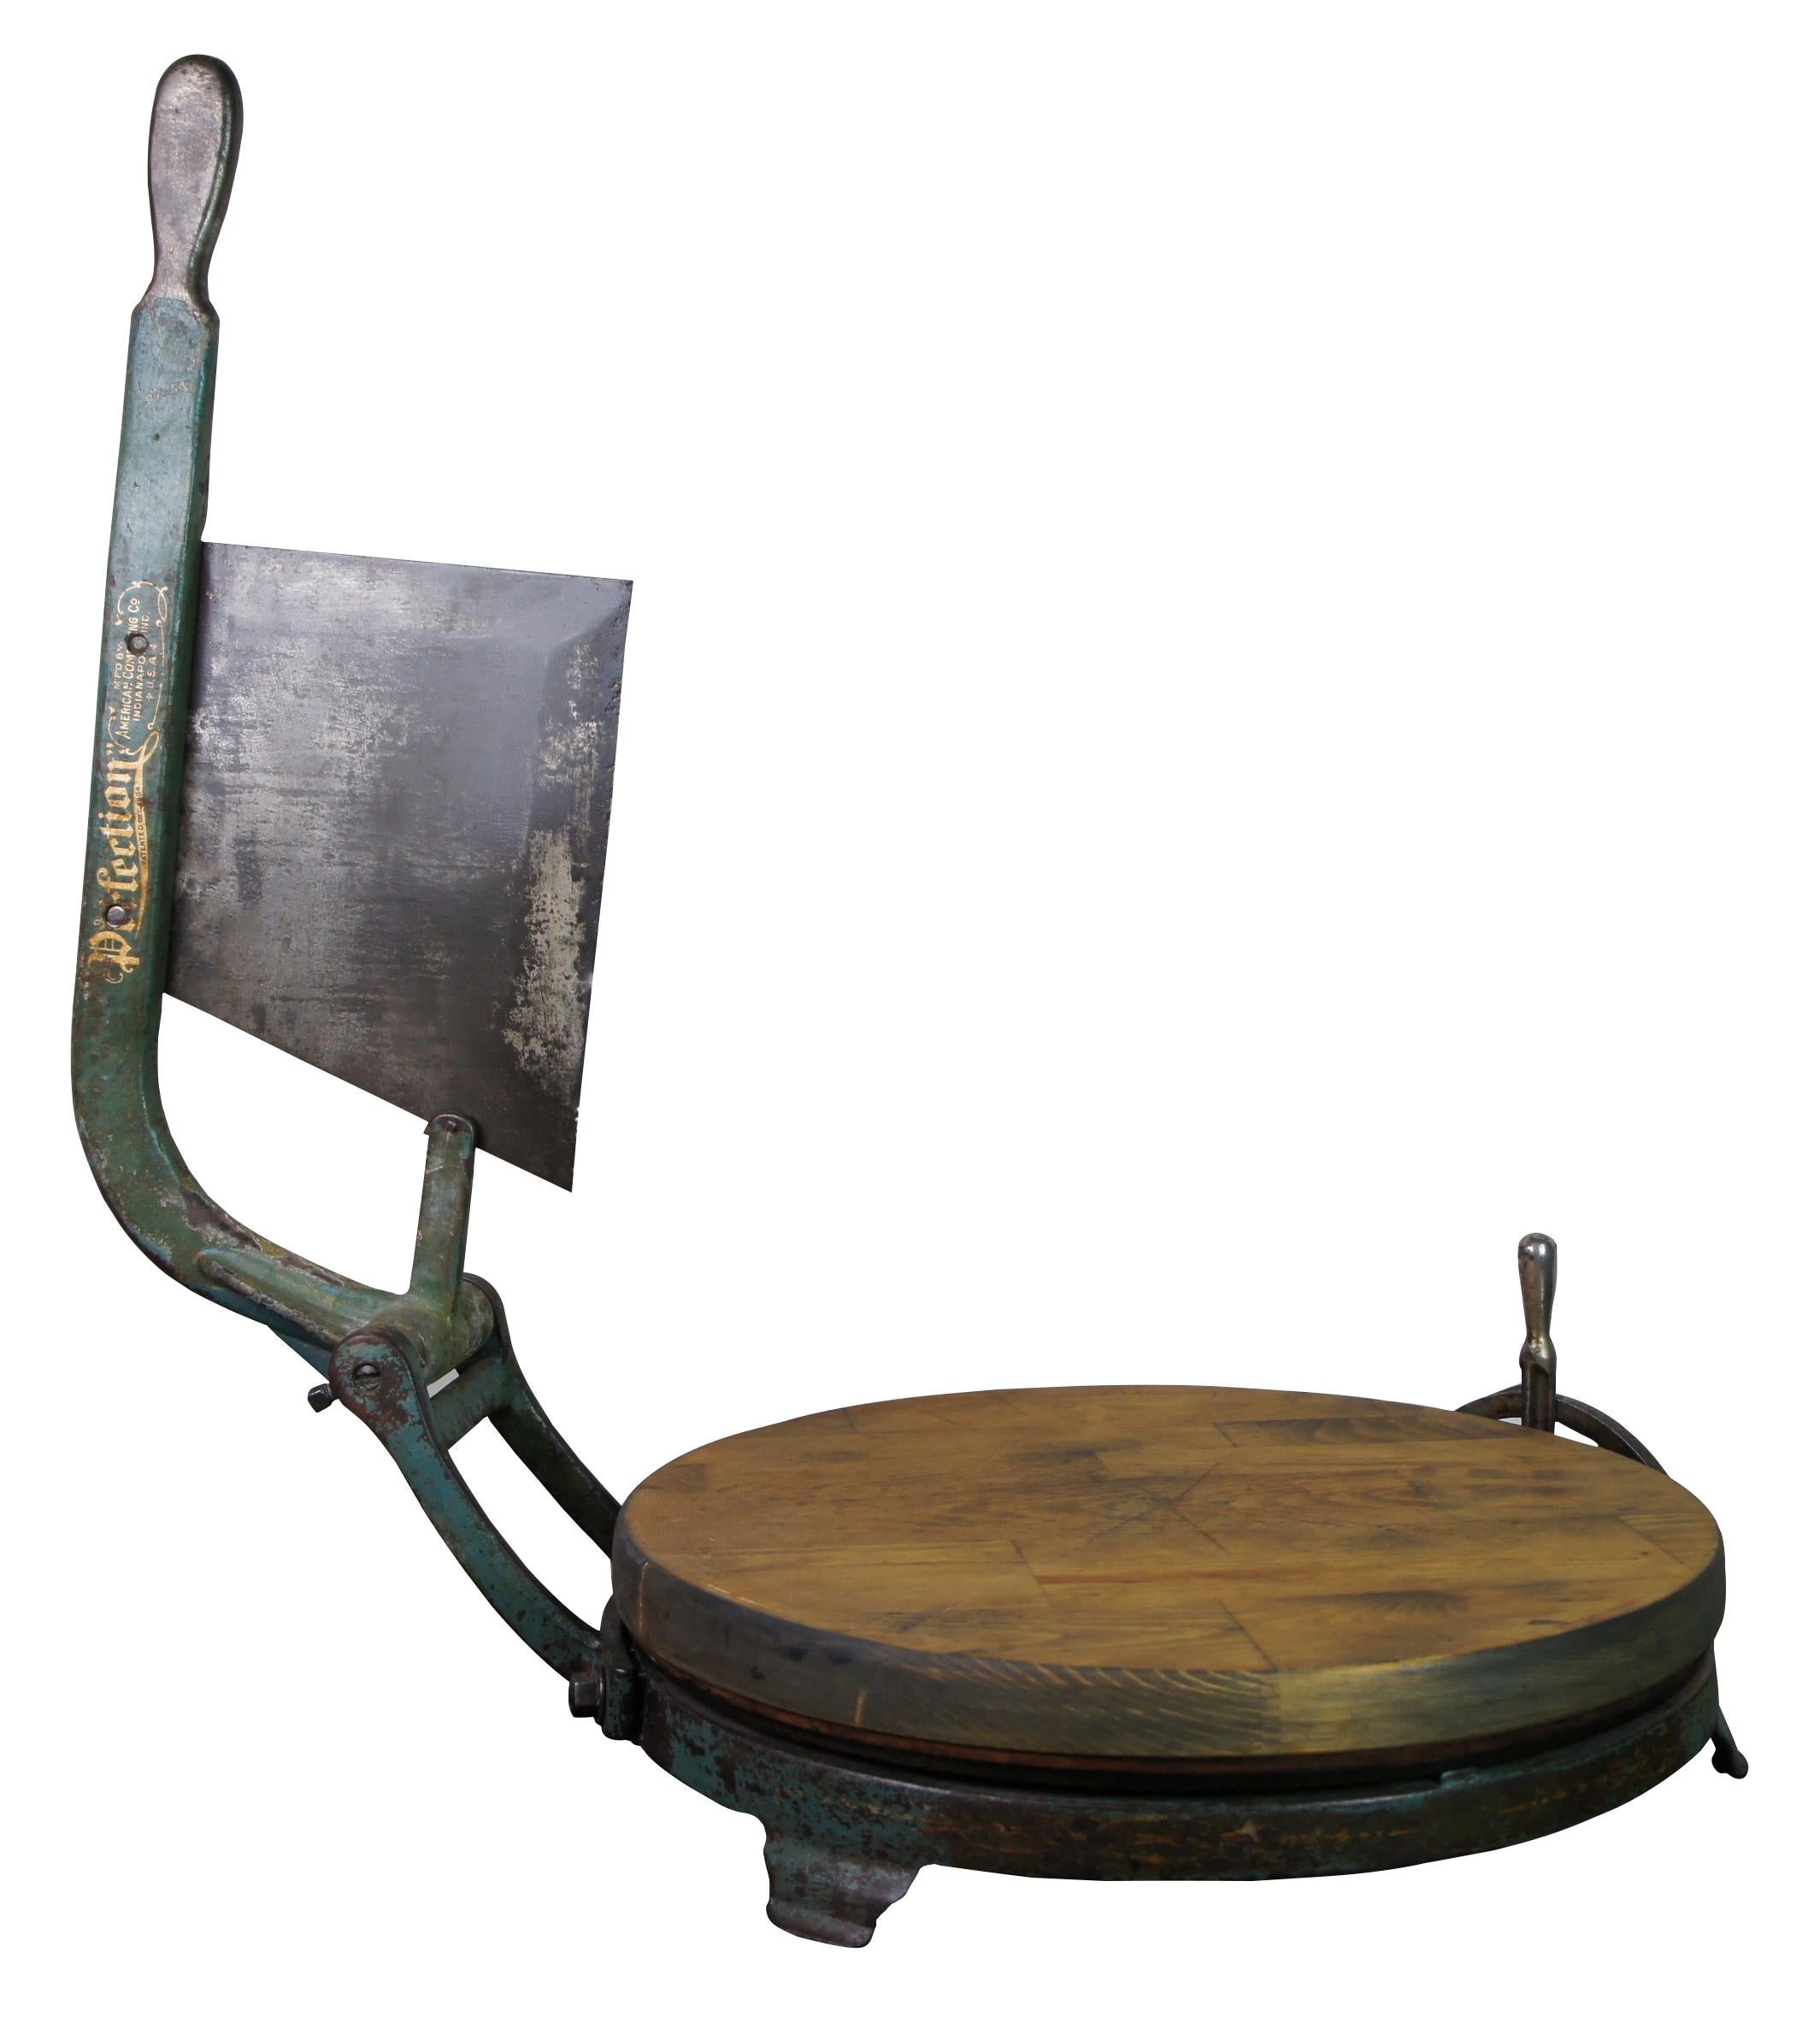 Antique 1904 industrial Perfection cheese wheel or meat cutter by American Computing Co.

The Computing Scale Company a precursor to IBM was founded in 1891 by Edward Canby and Orange O. Ozias in Dayton, Ohio. Its industry was computing scales and